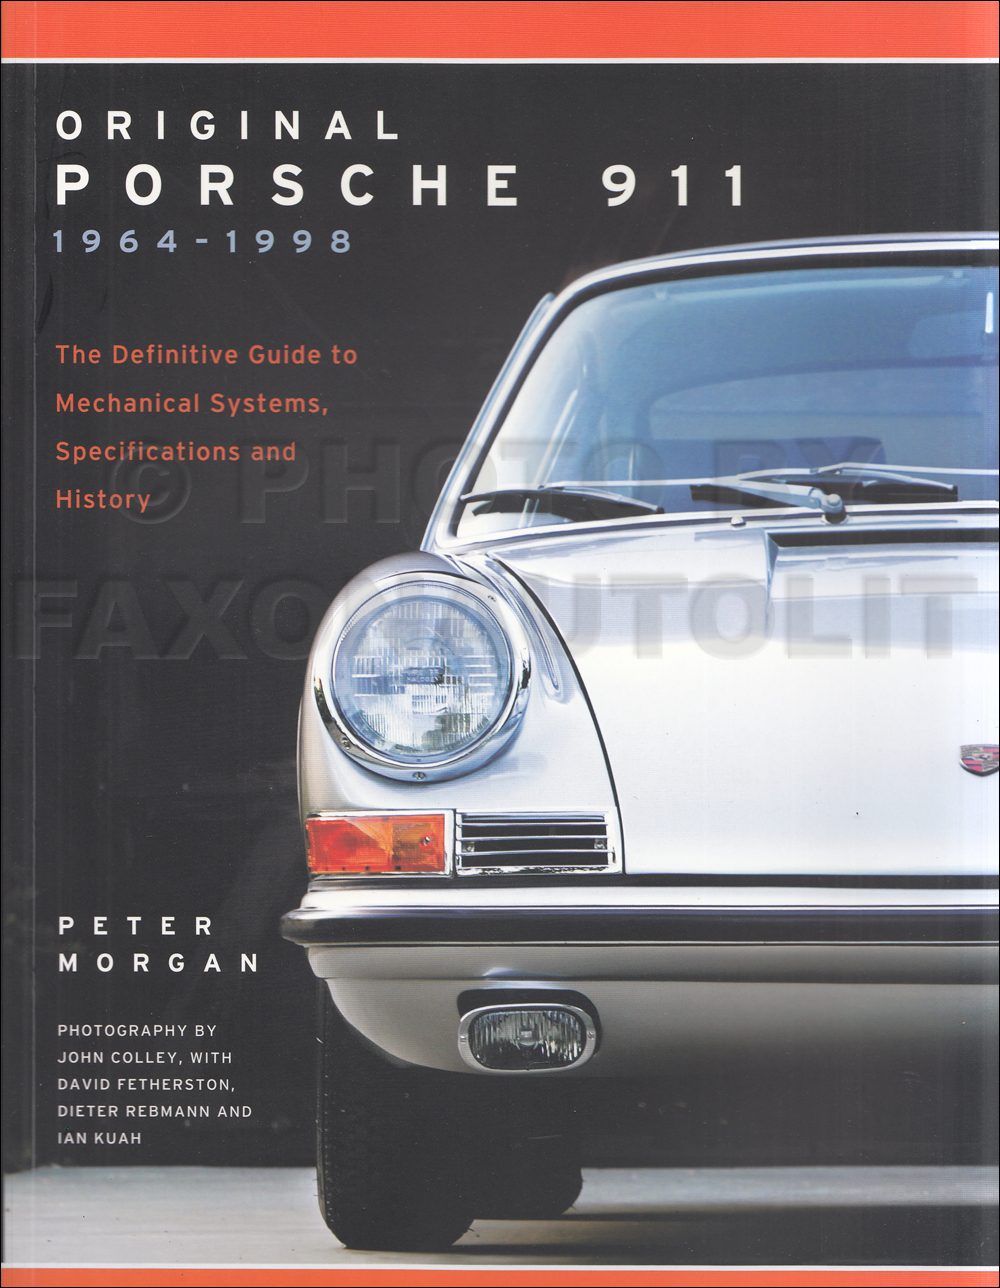 1964-1998 Original Porsche 911: Definitive Guide to Mechanical Systems, Specs, and History